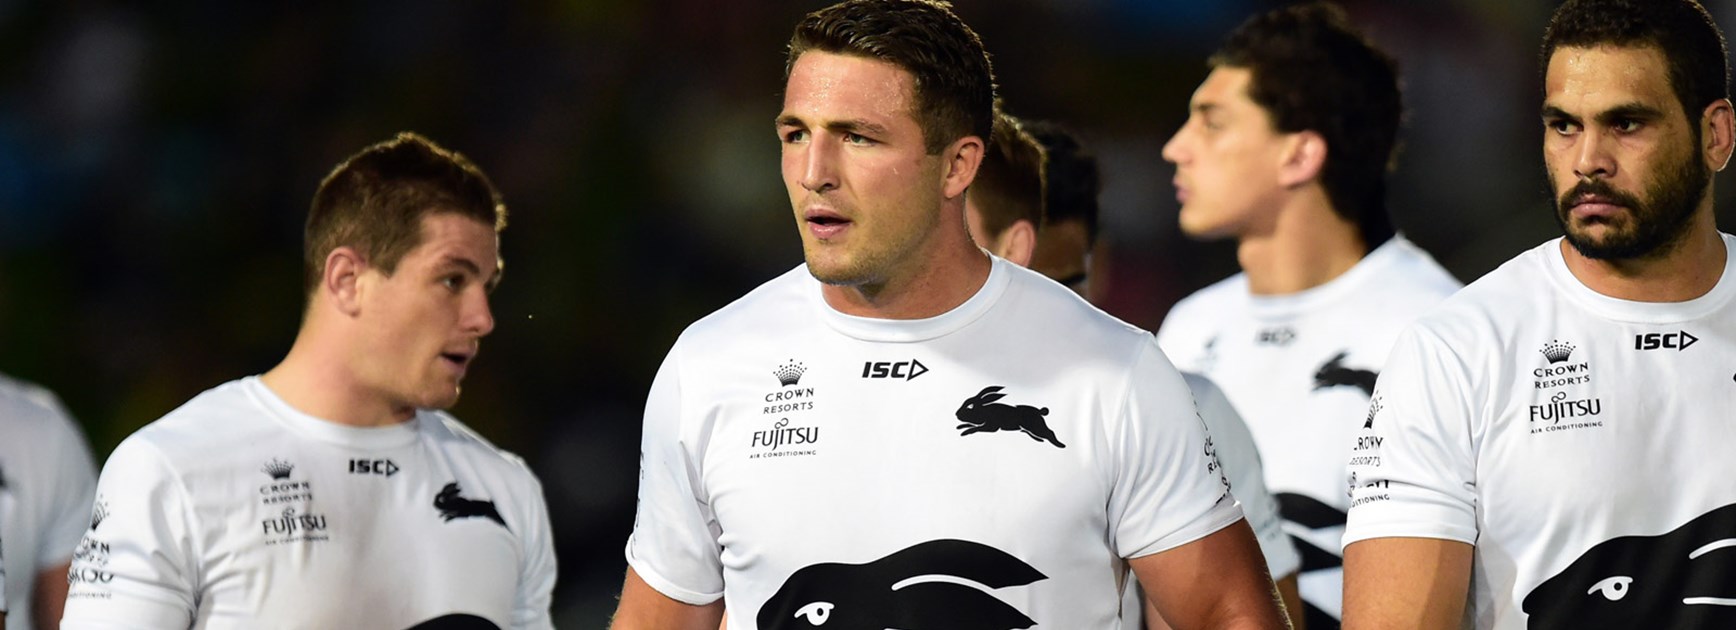 Rabbitohs forward Sam Burgess was injured in his side's loss to Wests Tigers in Round 14.